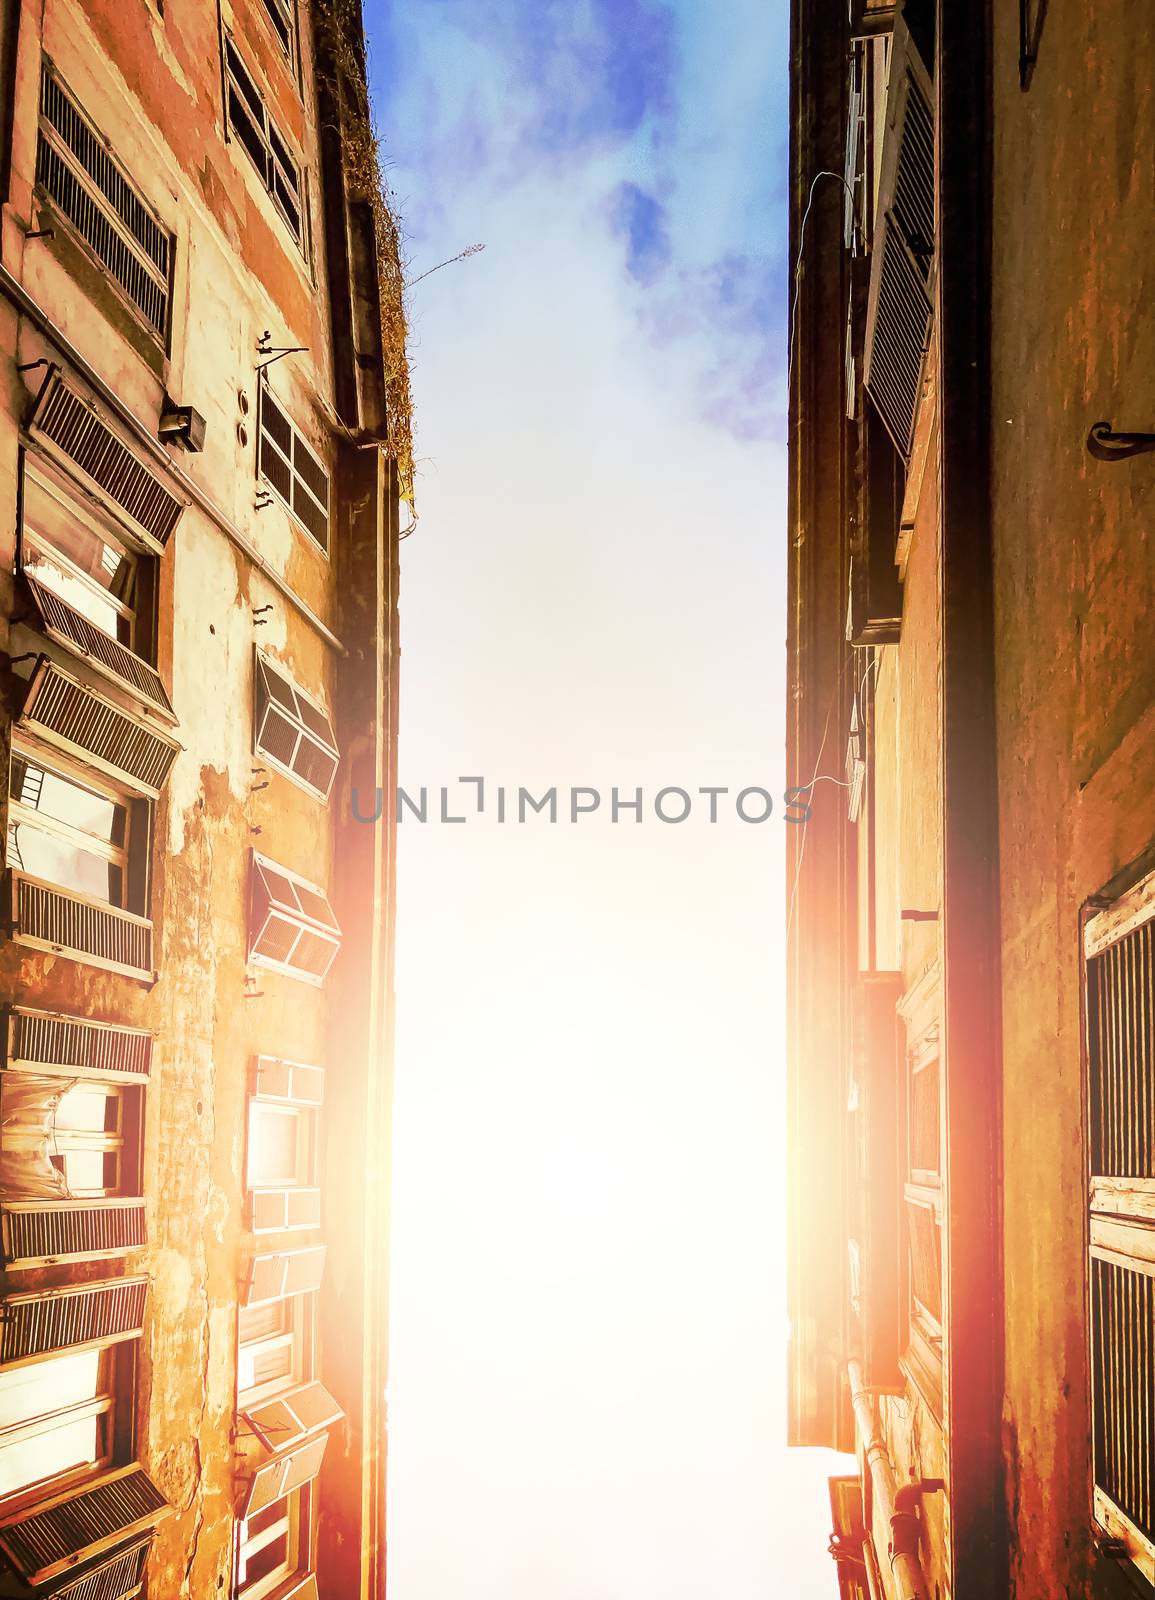 illuminated cloudy sky of the sun seen through the ancient buildings of an alley in Rome during the day. by rarrarorro